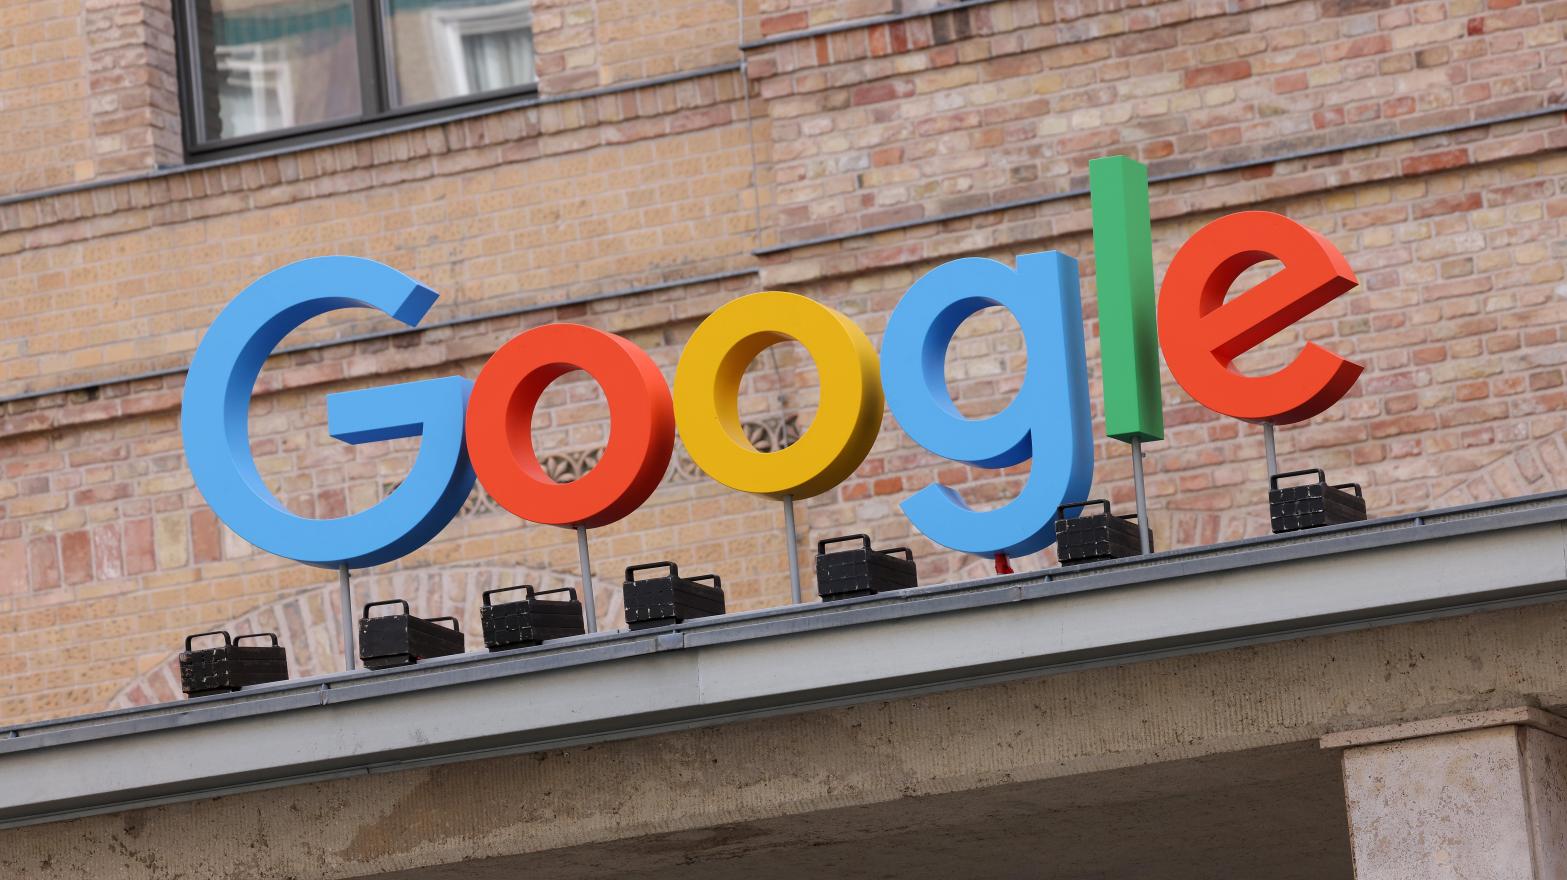 1,367 employees have signed the letter, which calls for priority in rehiring severed Google employees and waiting until employees on leave return to the office before terminating them. (Image: Sean Gallup)